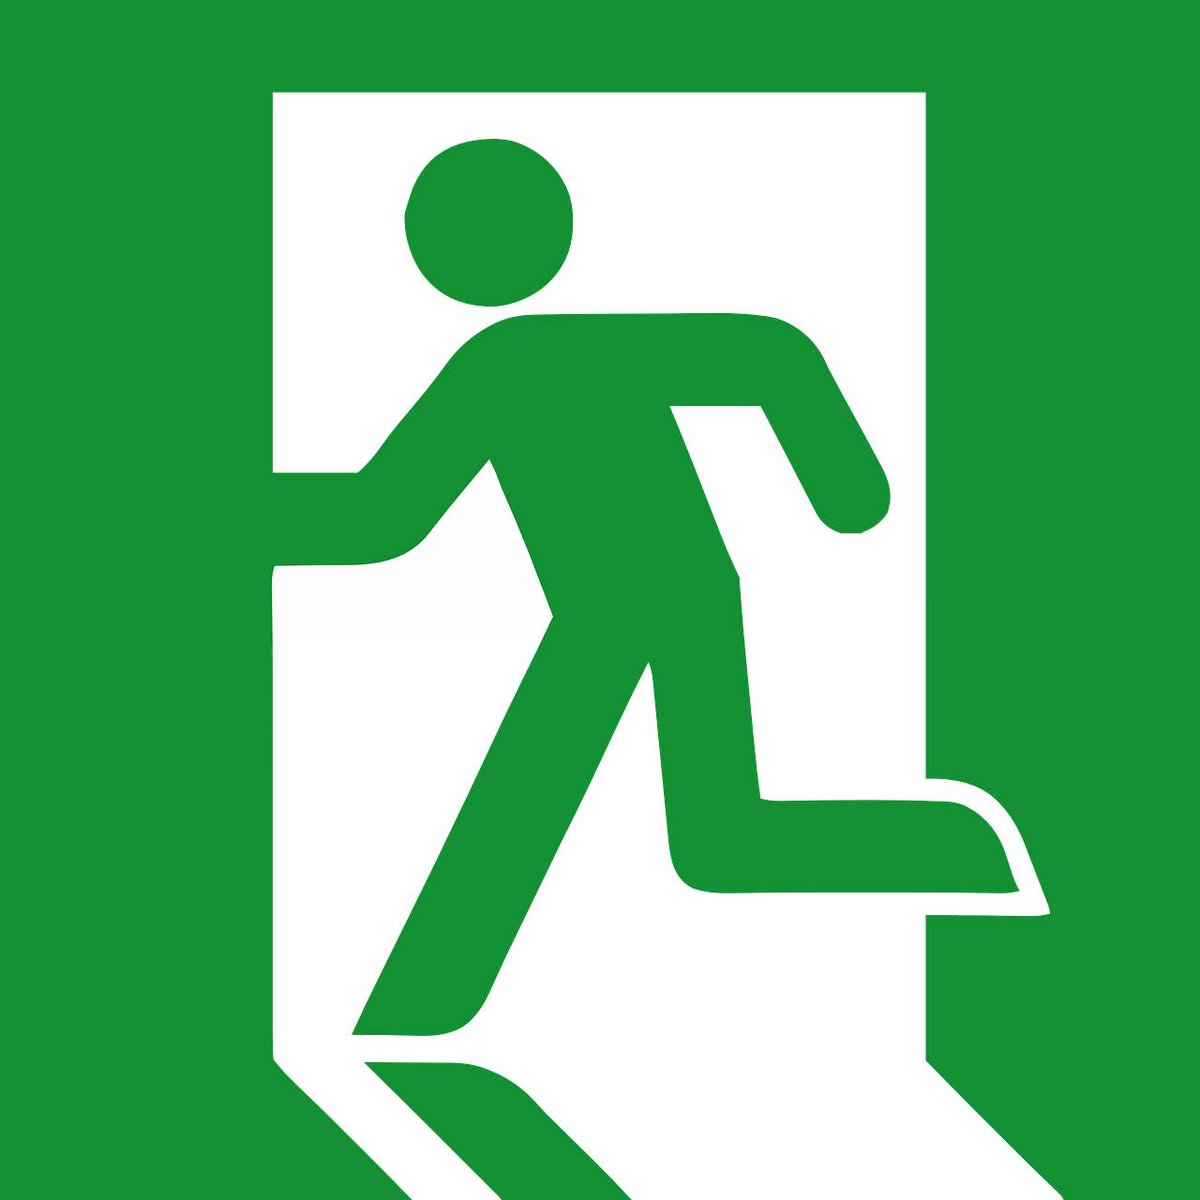 Within all places of work, HMO properties and communal areas of flats emergency lighting is a legal requirement. We can recommend the best emergency lighting to meet your needs and carry out maintenance to ensure it is always in working order.
#emergencylighting #HMOproperties